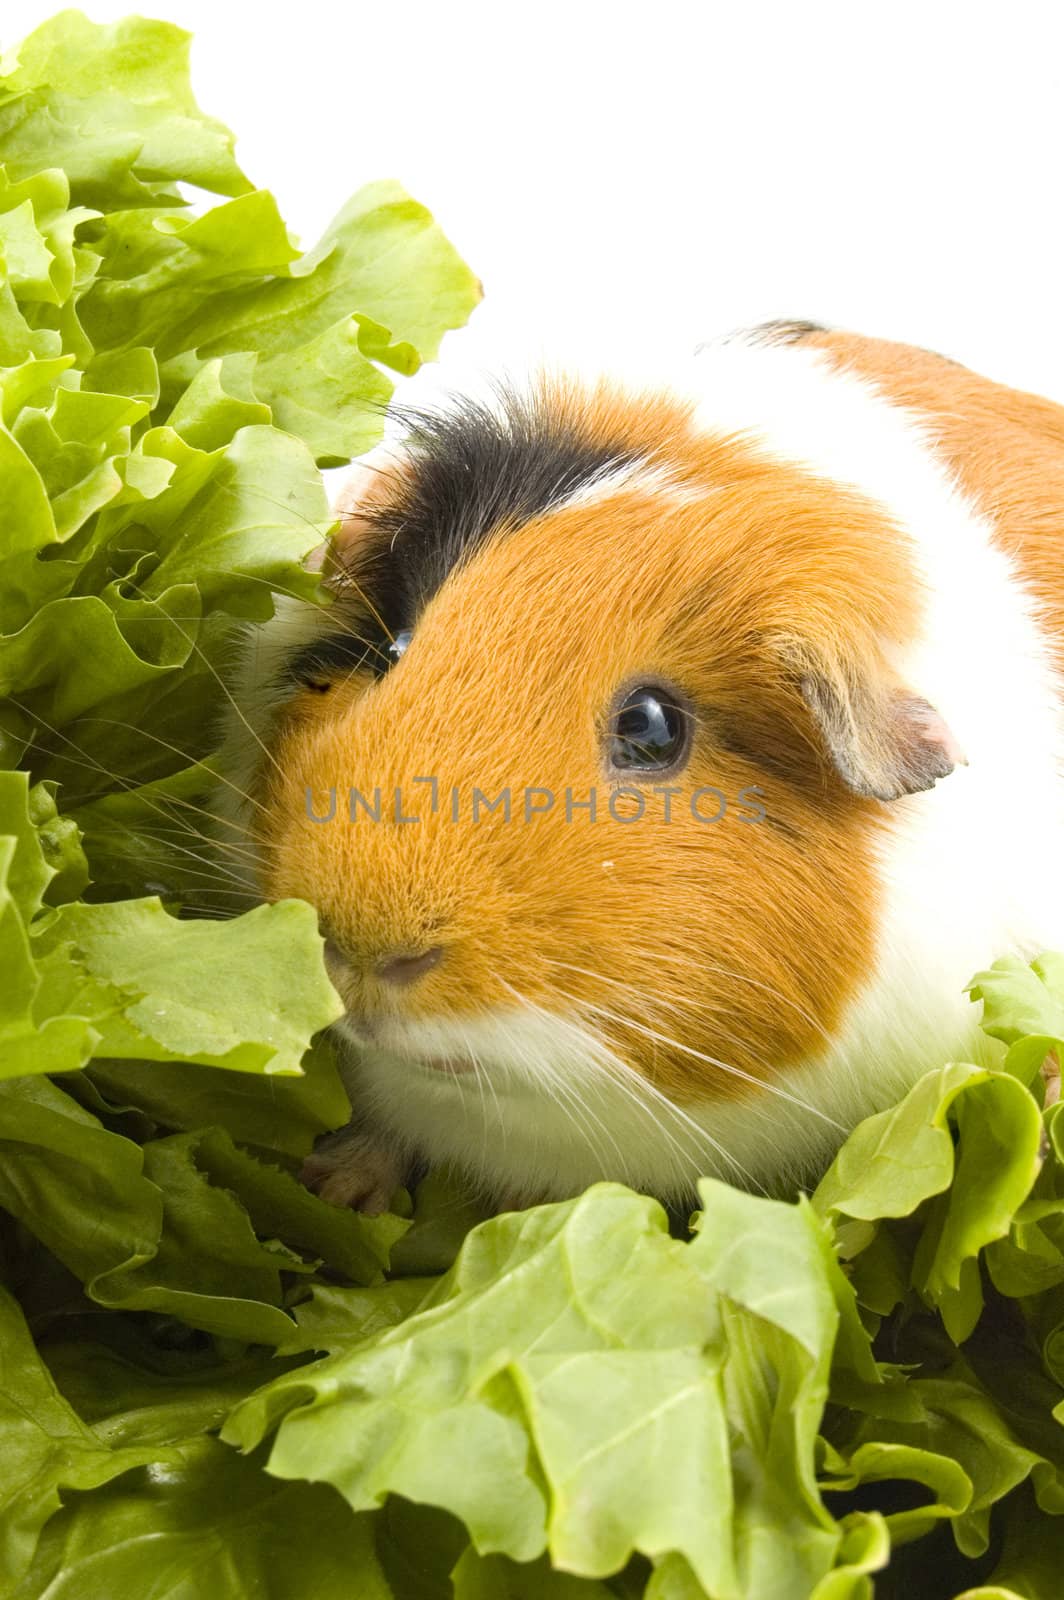 guinea pig is sitting between endive leafs on white